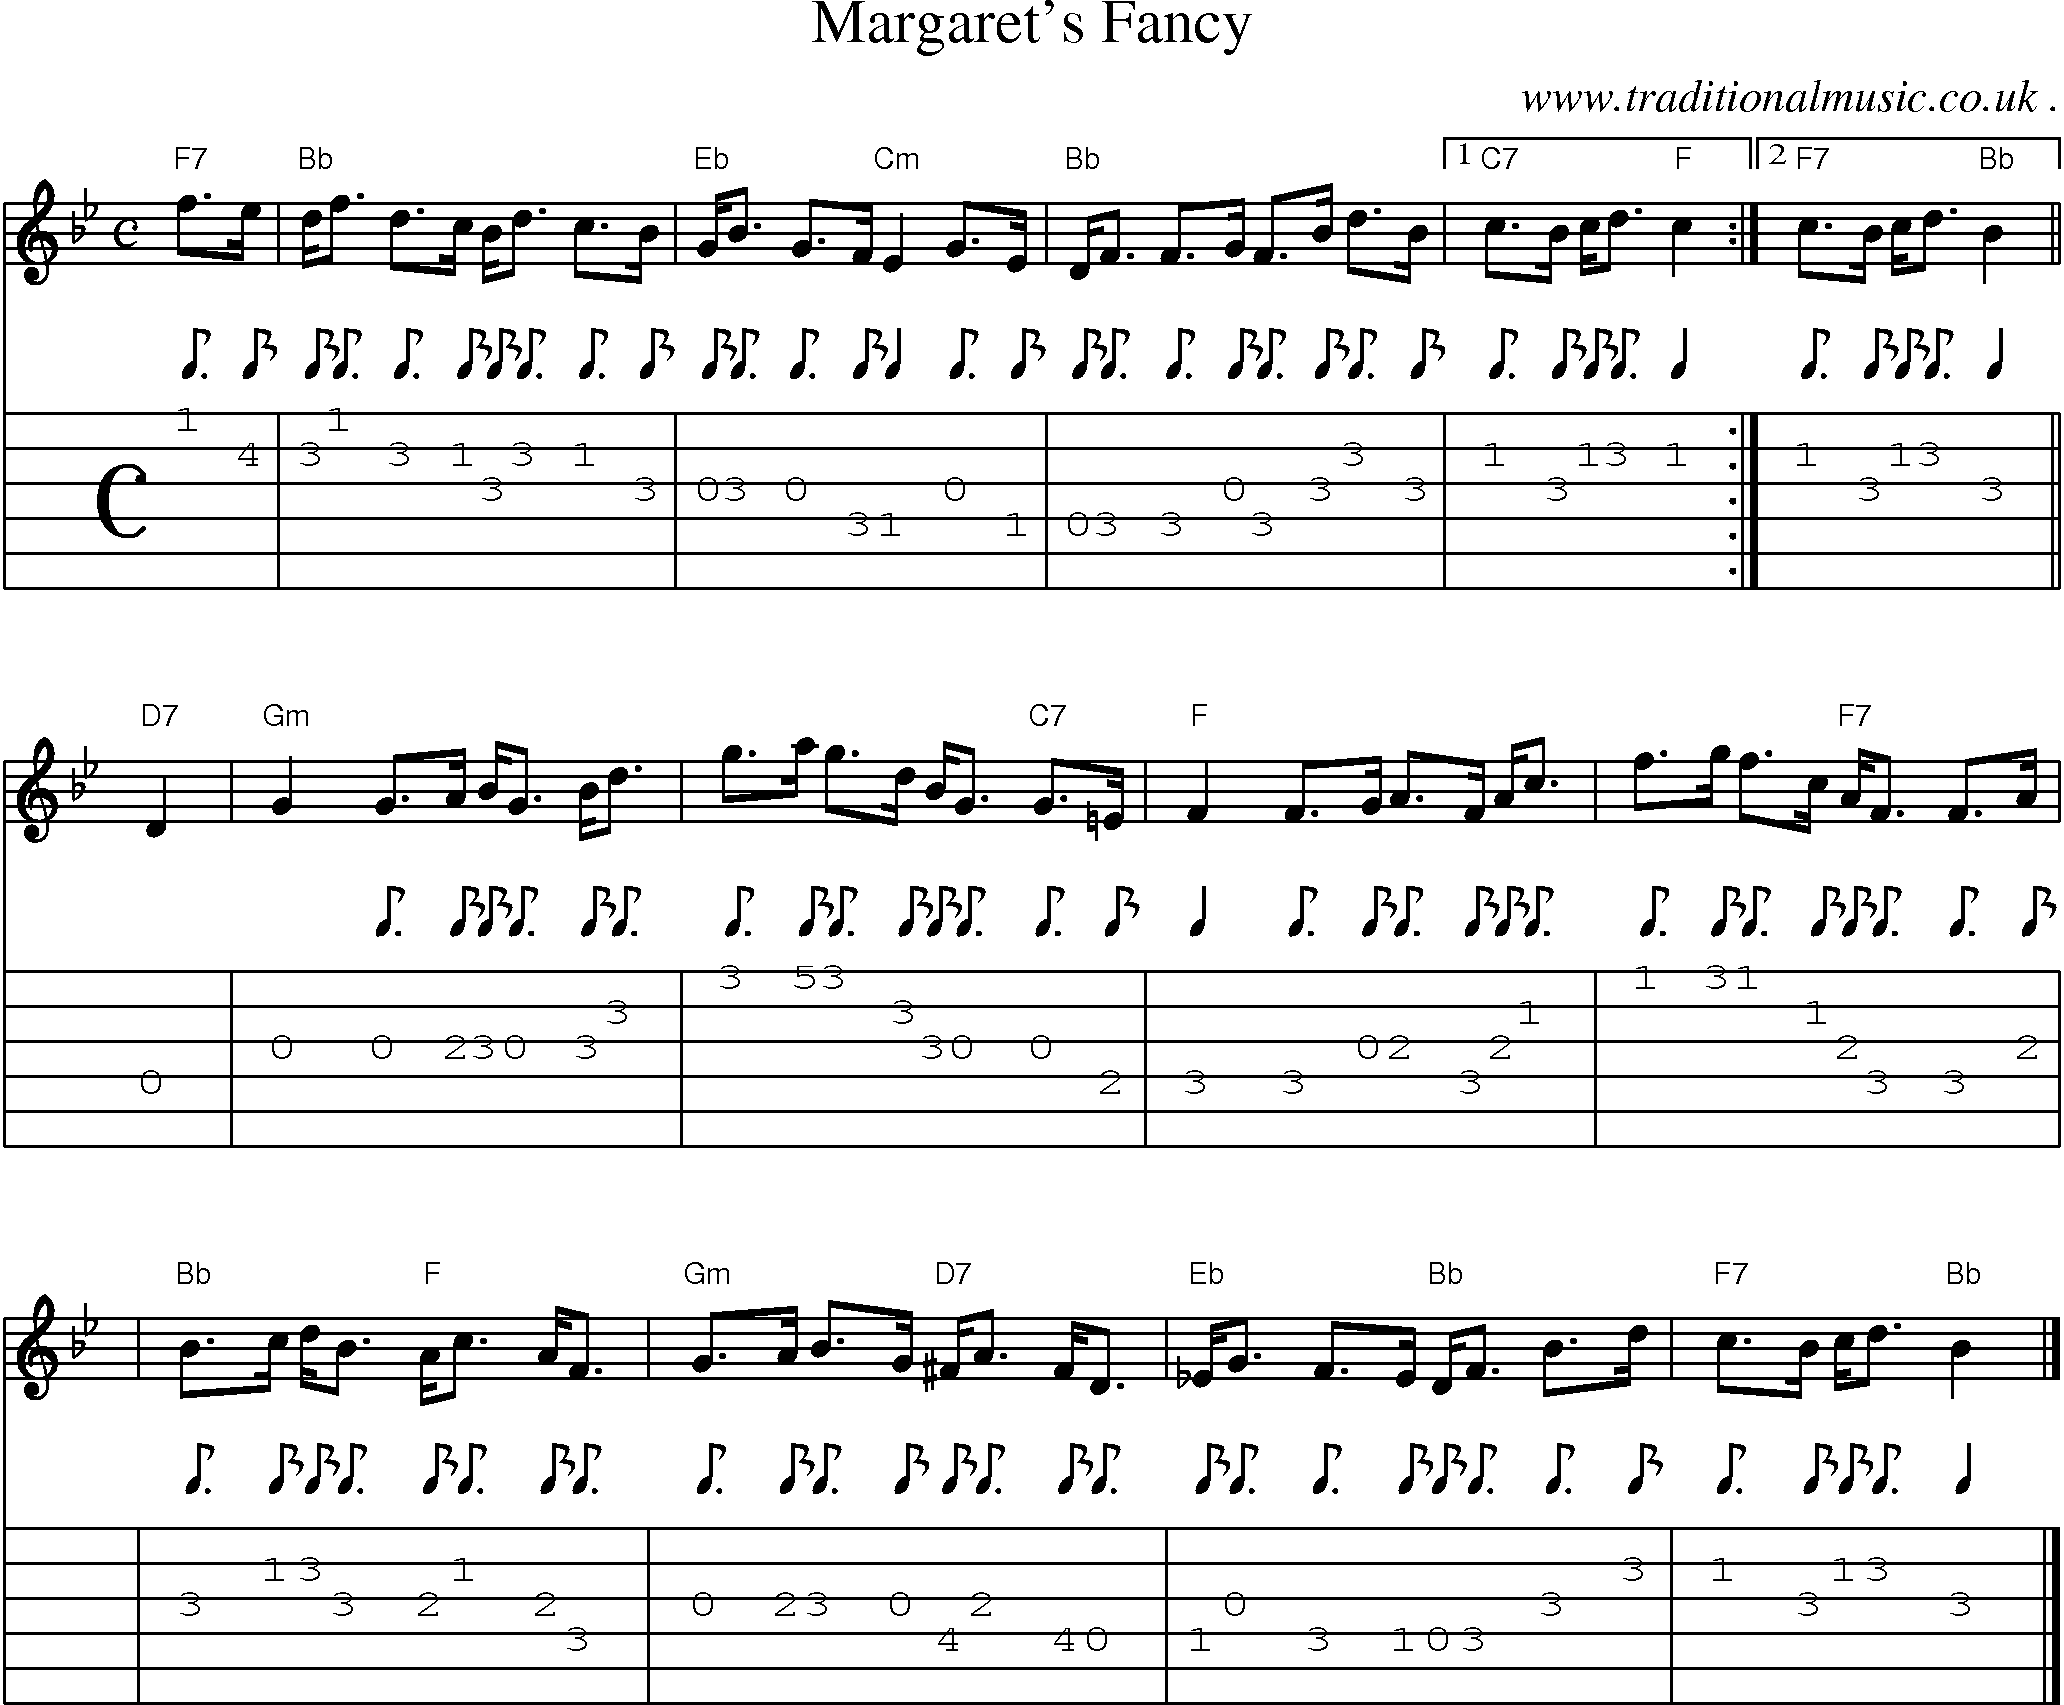 Sheet-music  score, Chords and Guitar Tabs for Margarets Fancy